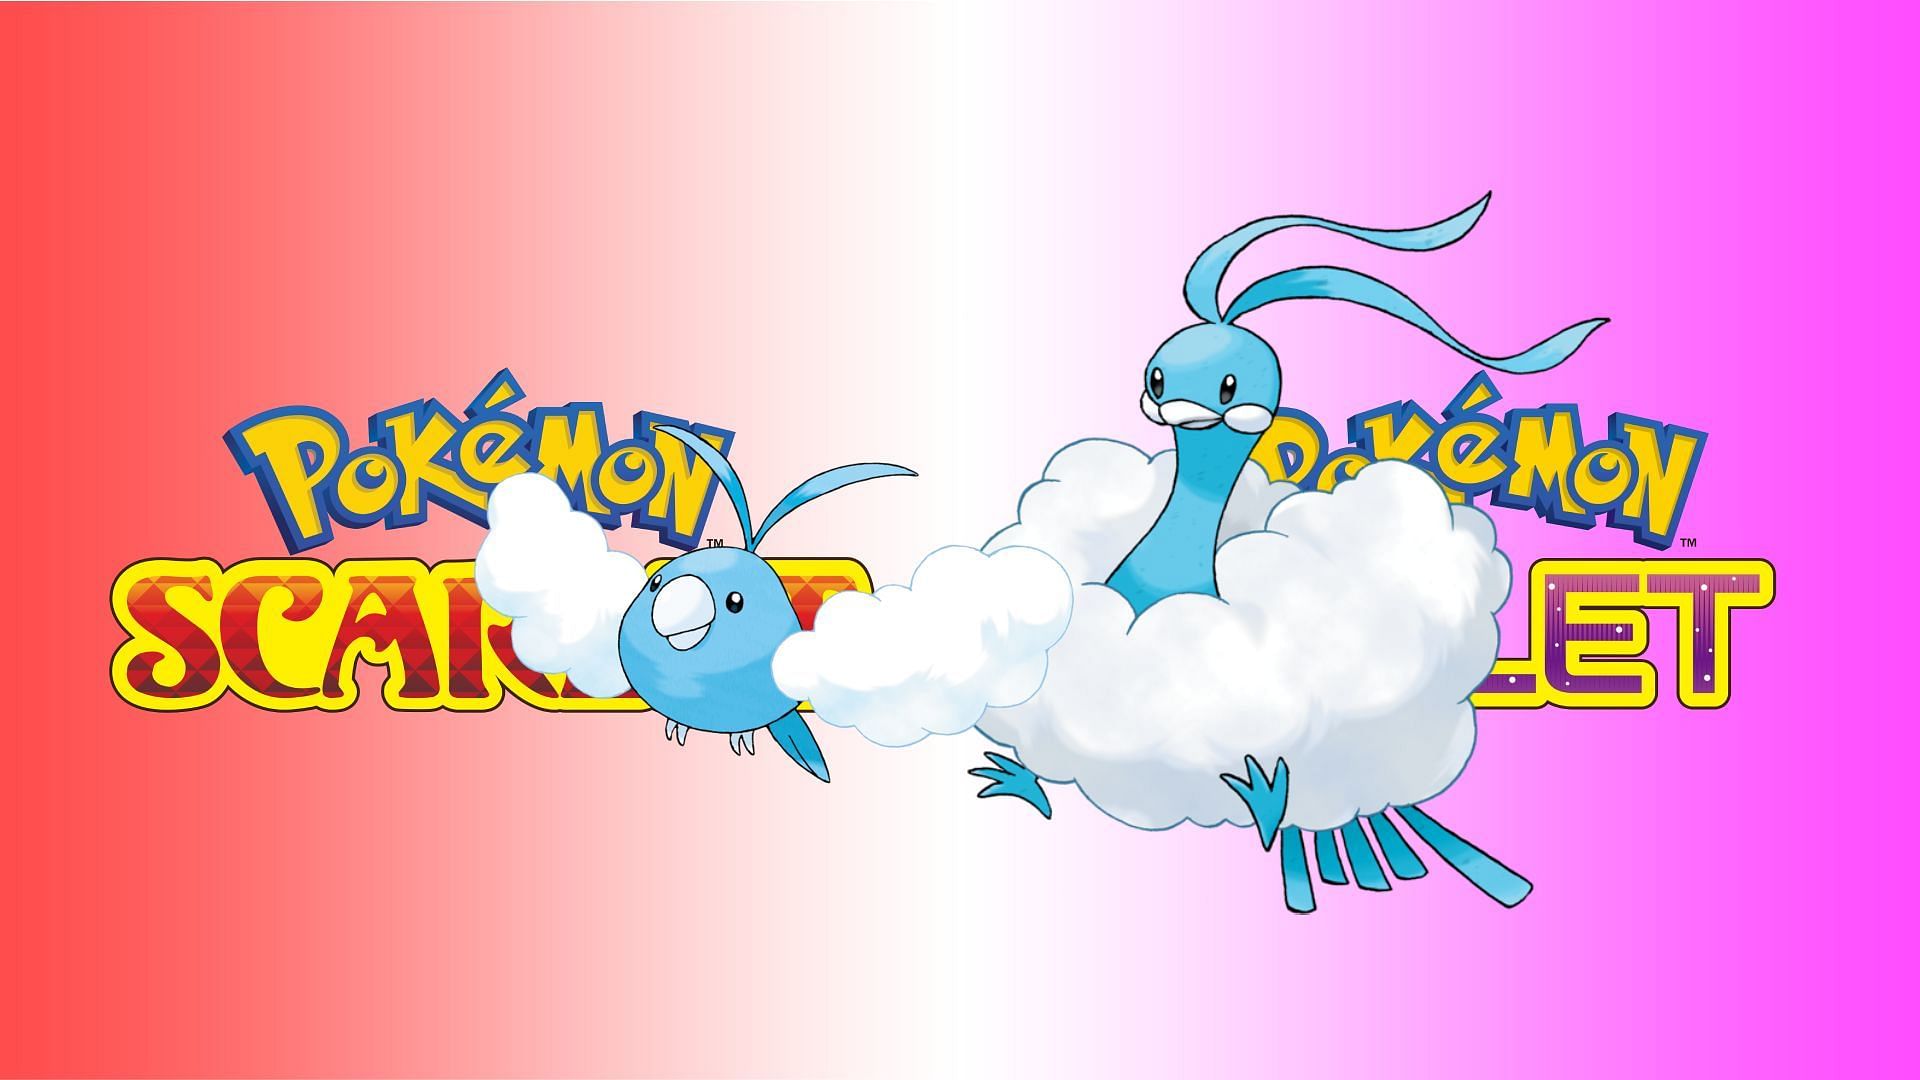 How to get Swablu and Altaria (Image via Pokemon Scarlet and Violet)